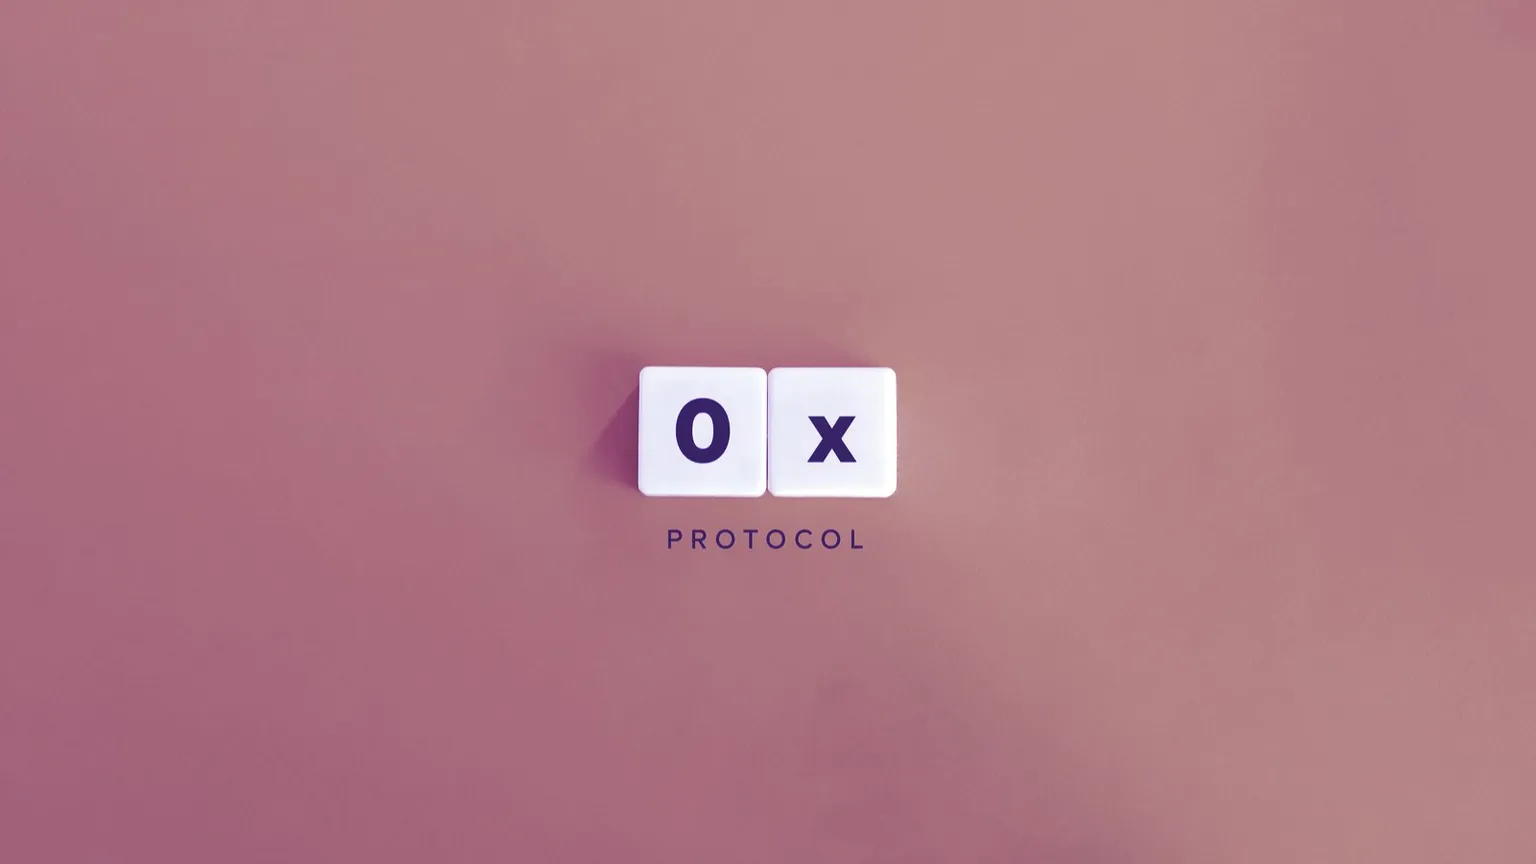 0x Protocol is a decentralized exchange platform initially built on Ethereum. Image: Shutterstock.